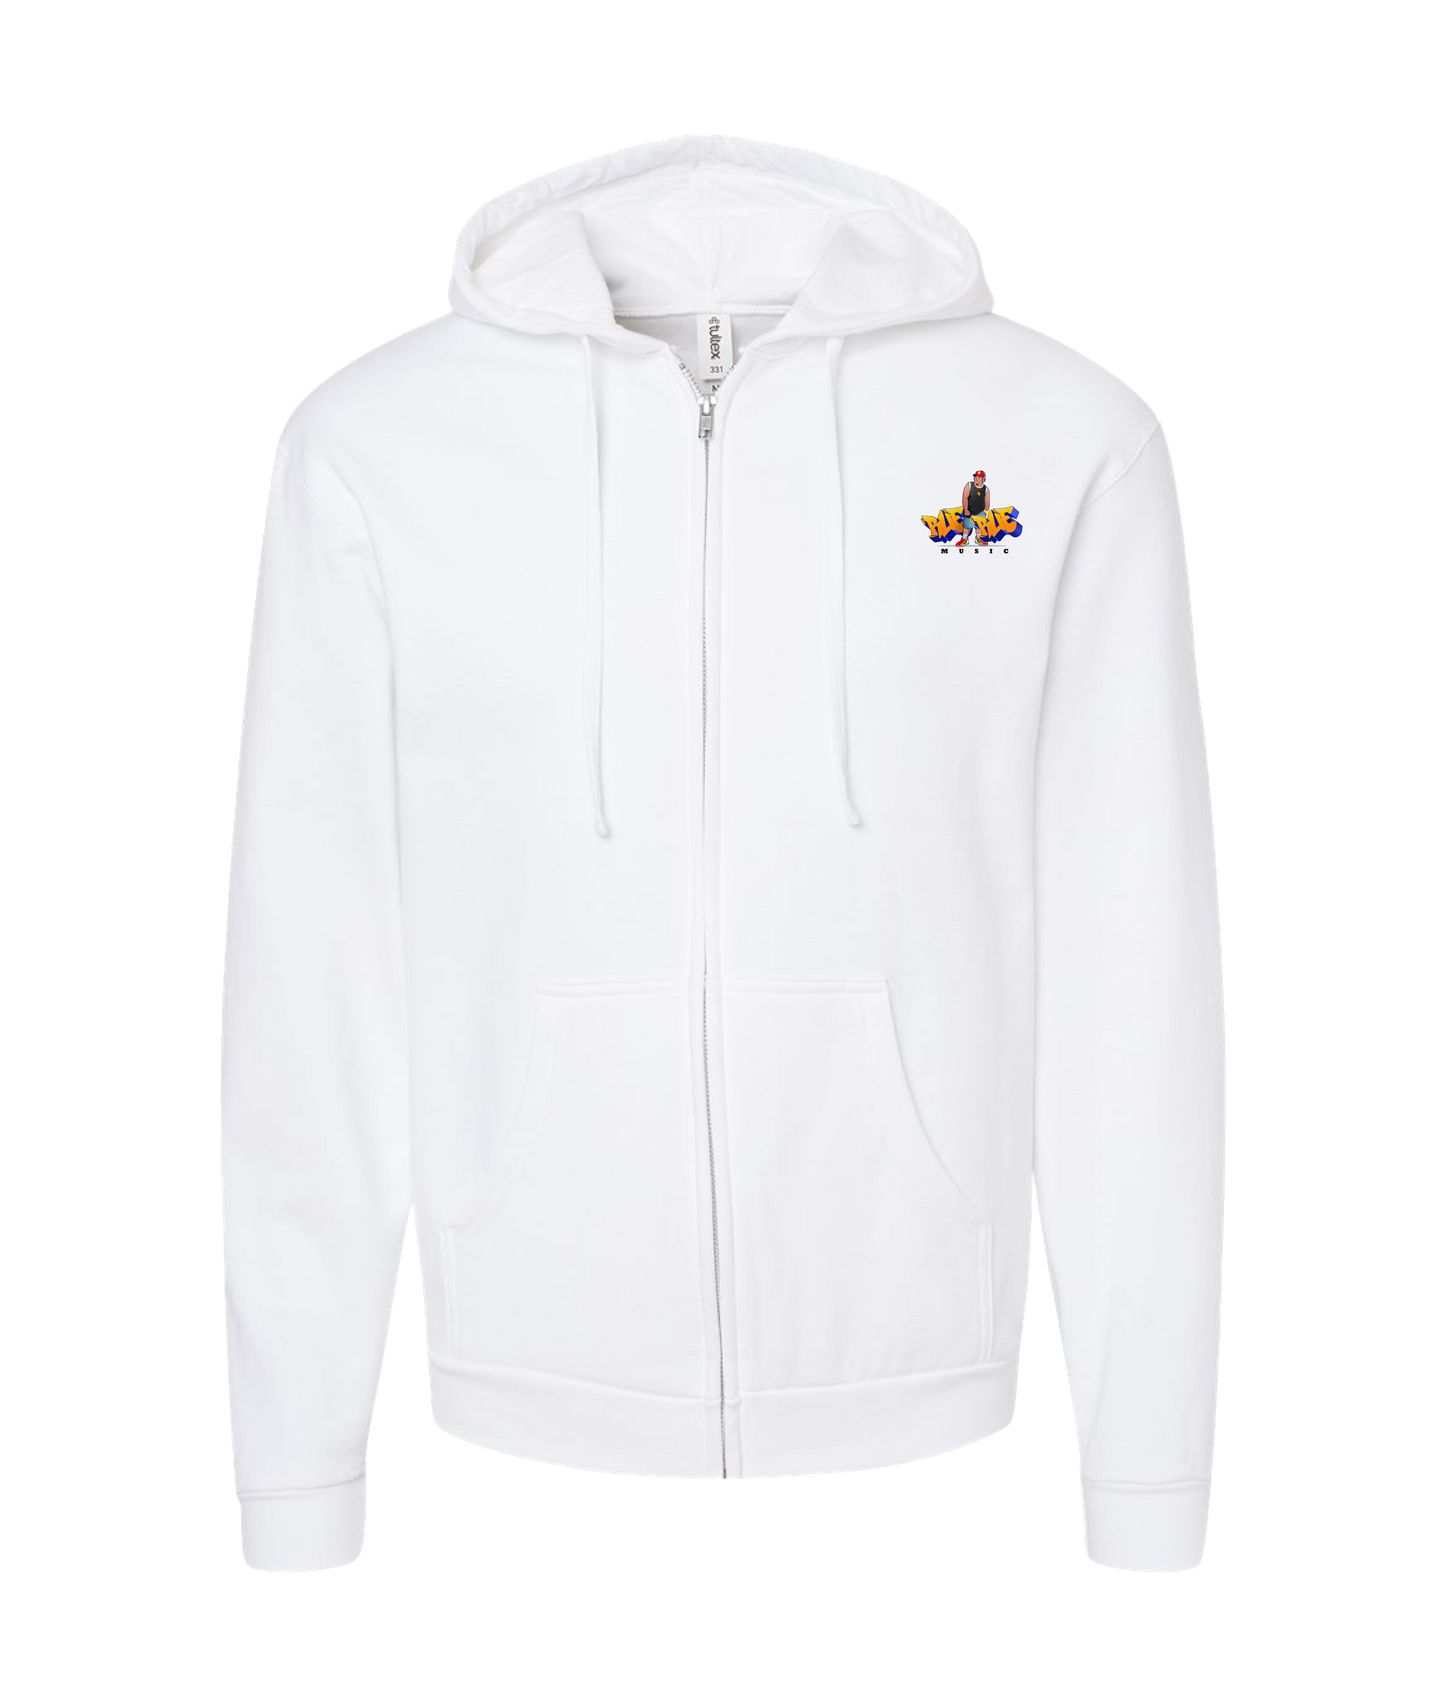 Dynamic Cert Music Collective - RUE - White Zip Up Hoodie